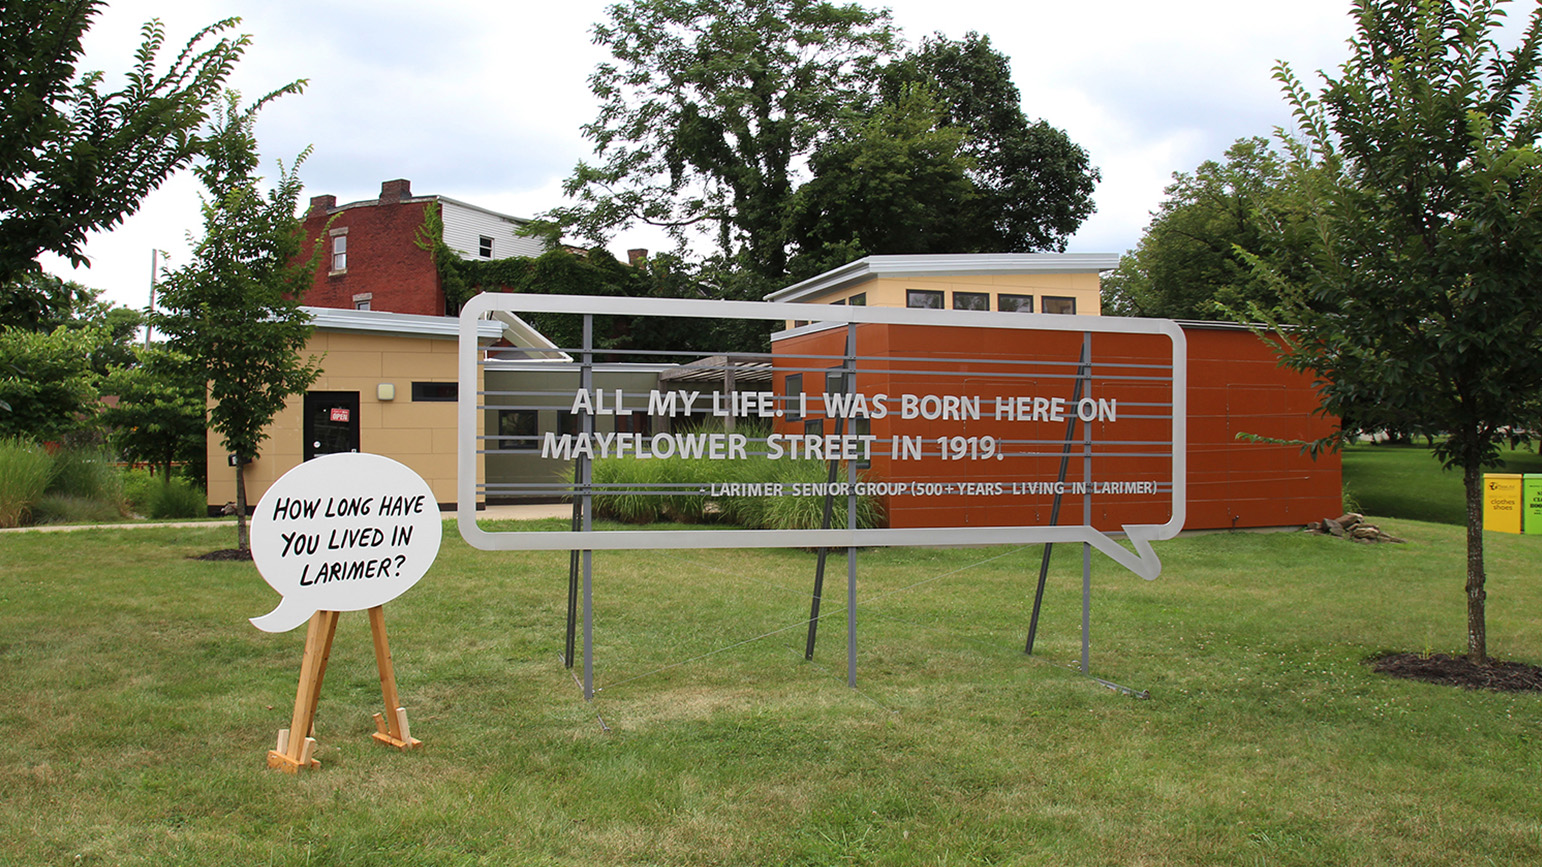 Two large speech bubbles installed outside, one reading "How long have you lived in Larimer" and the other reading "All my life. I was born here on Mayflower Street in 1919."